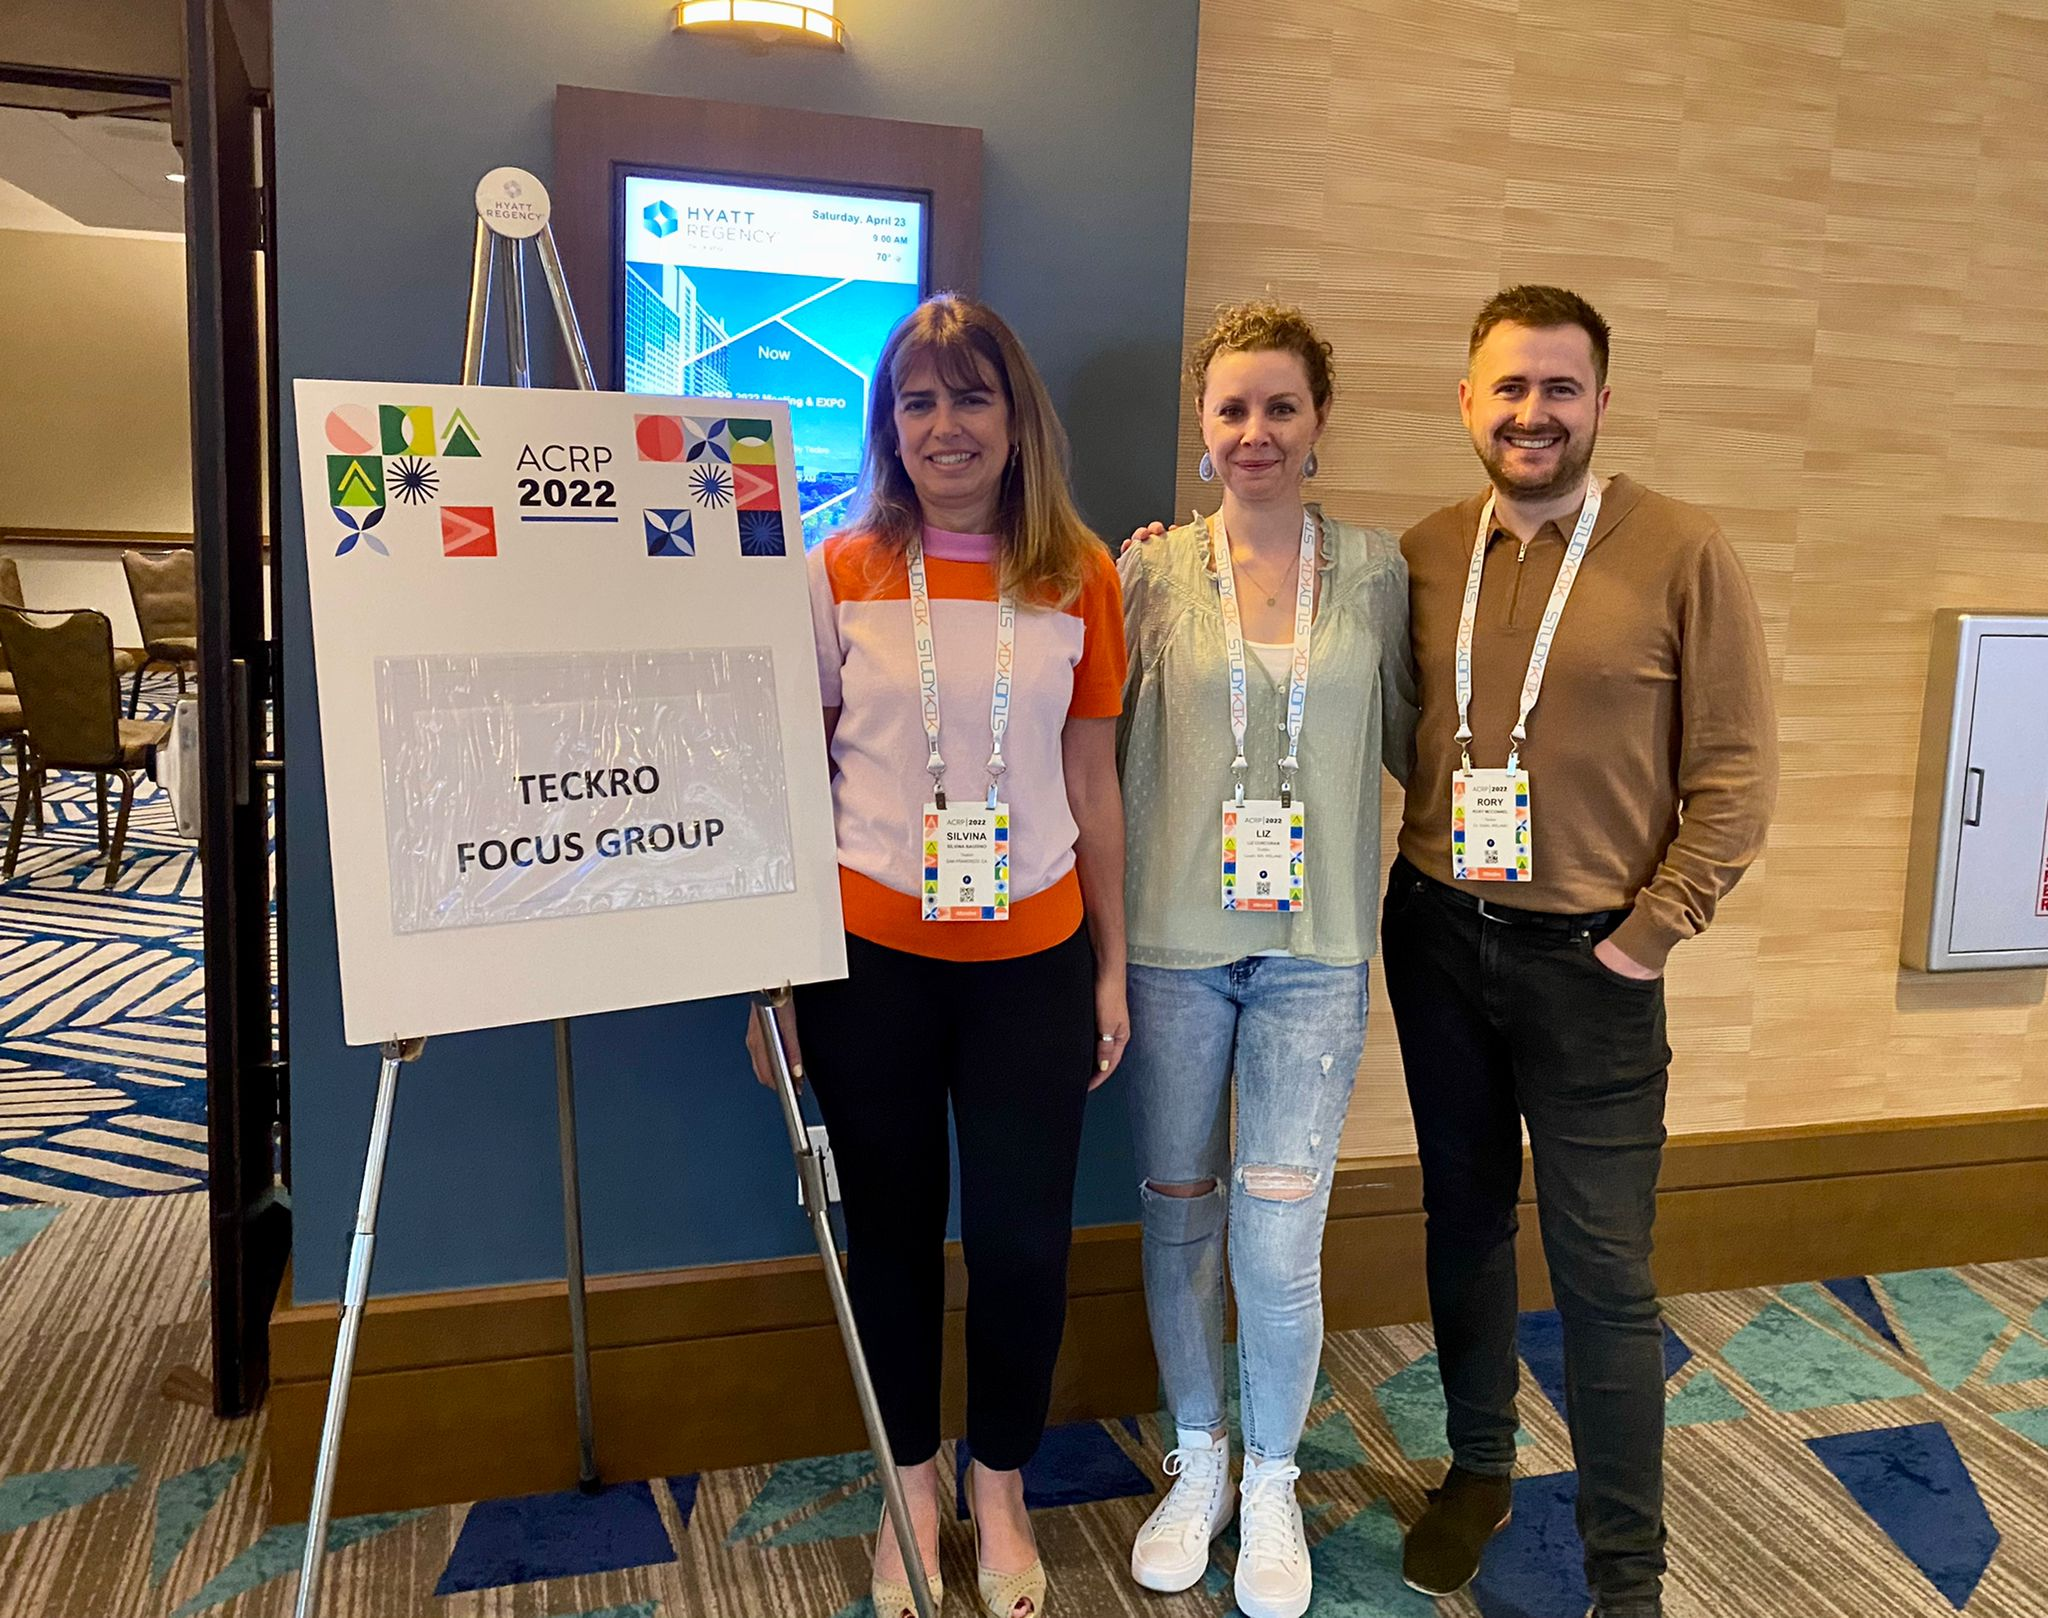 Photo of Silvina Baudino, Rory McConnell and Liz Corcoran at ACRP 2022 for a Teckro focus group